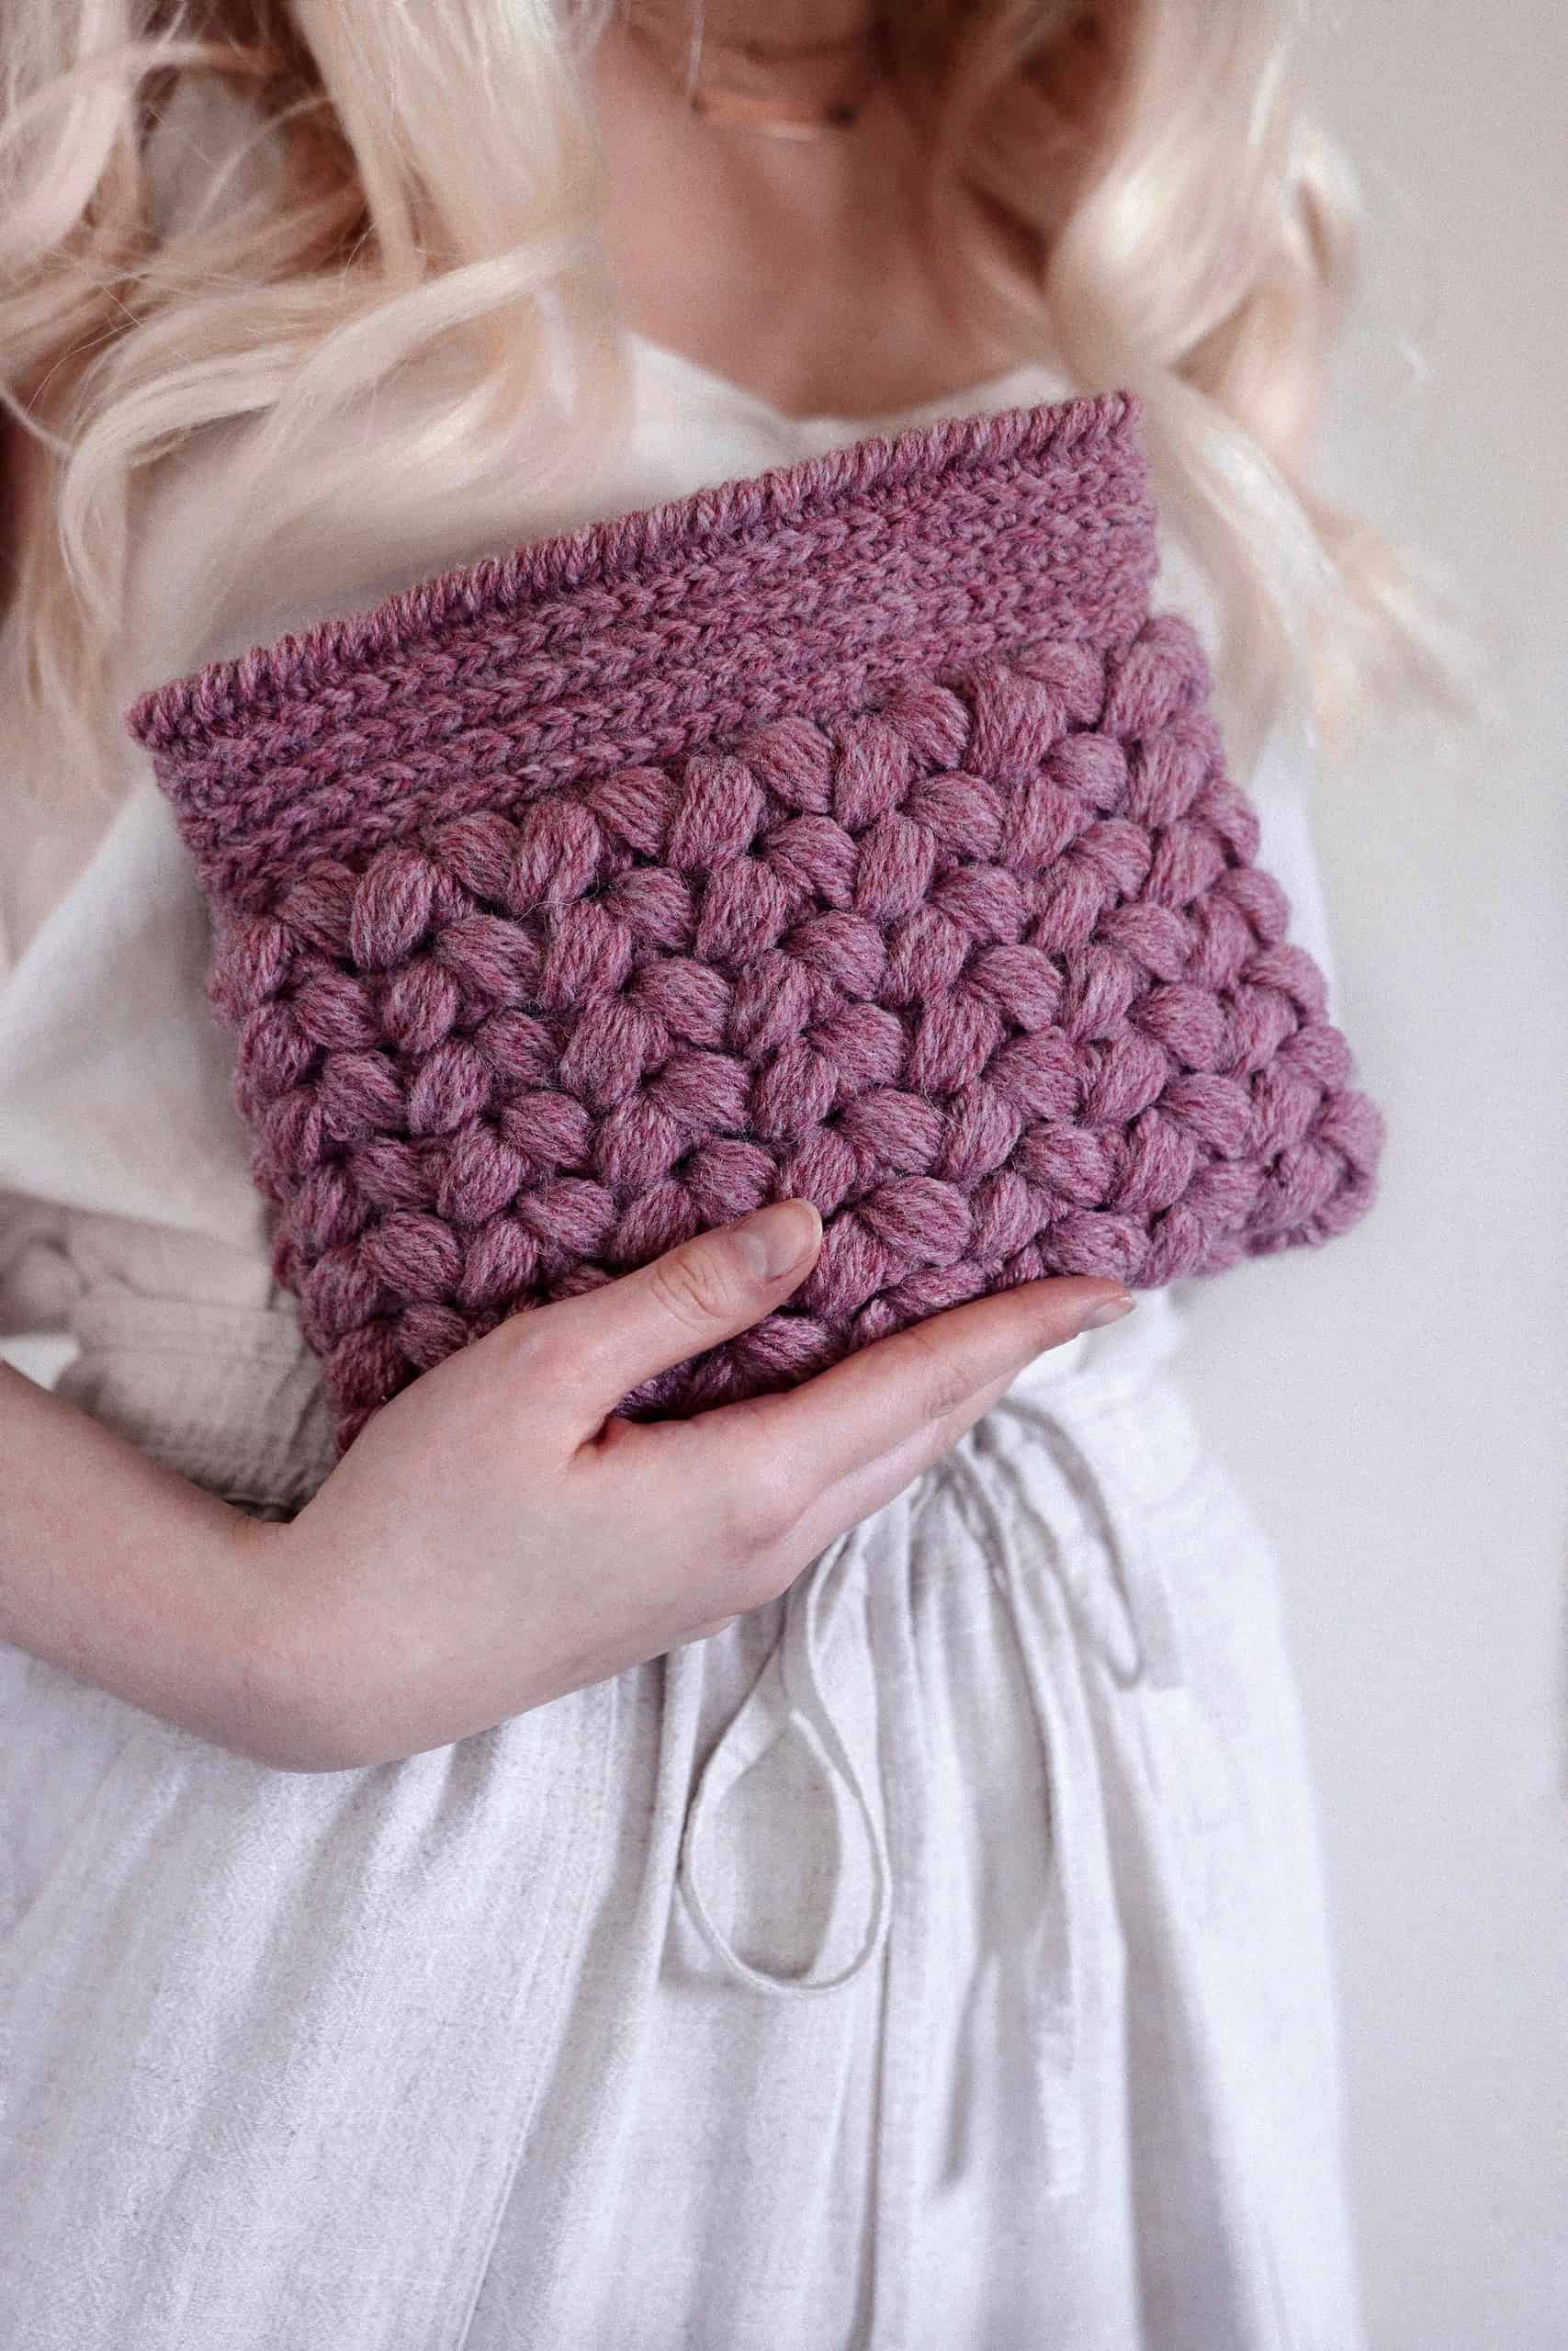 Reversible Felted Crochet Purse Free Pattern with Pocket! | Marly Bird